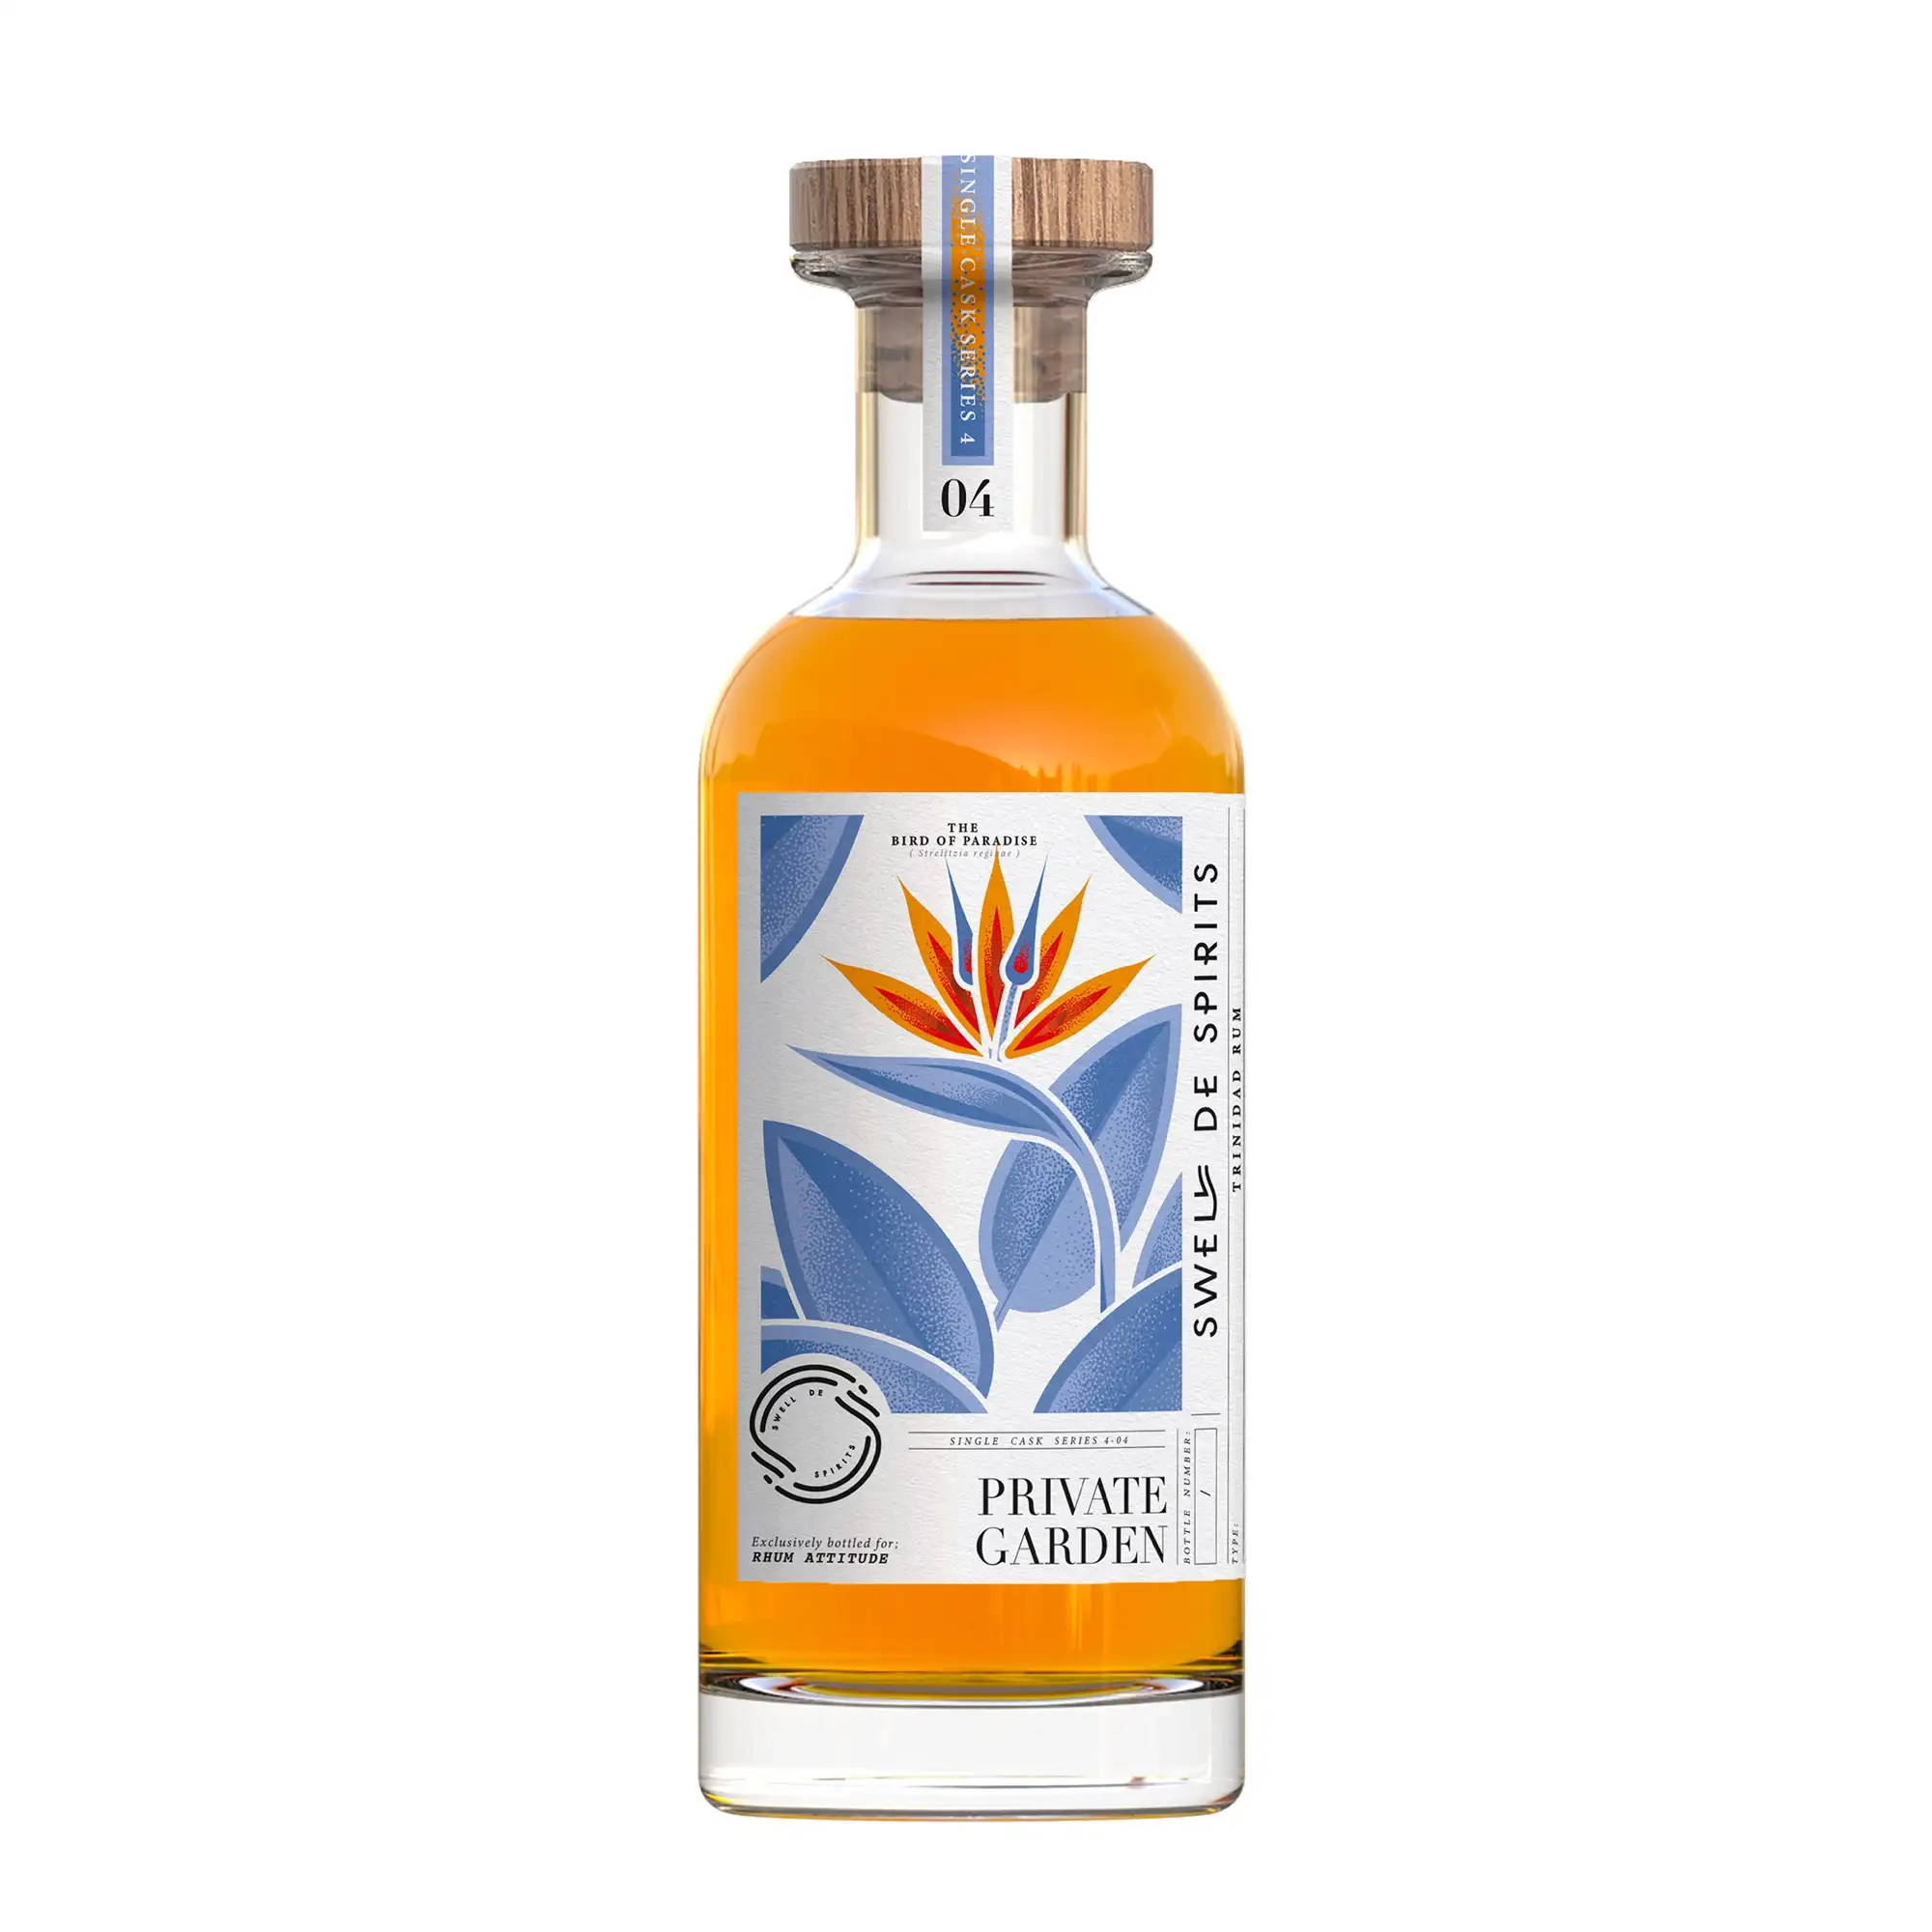 Image of the front of the bottle of the rum Private Garden #4